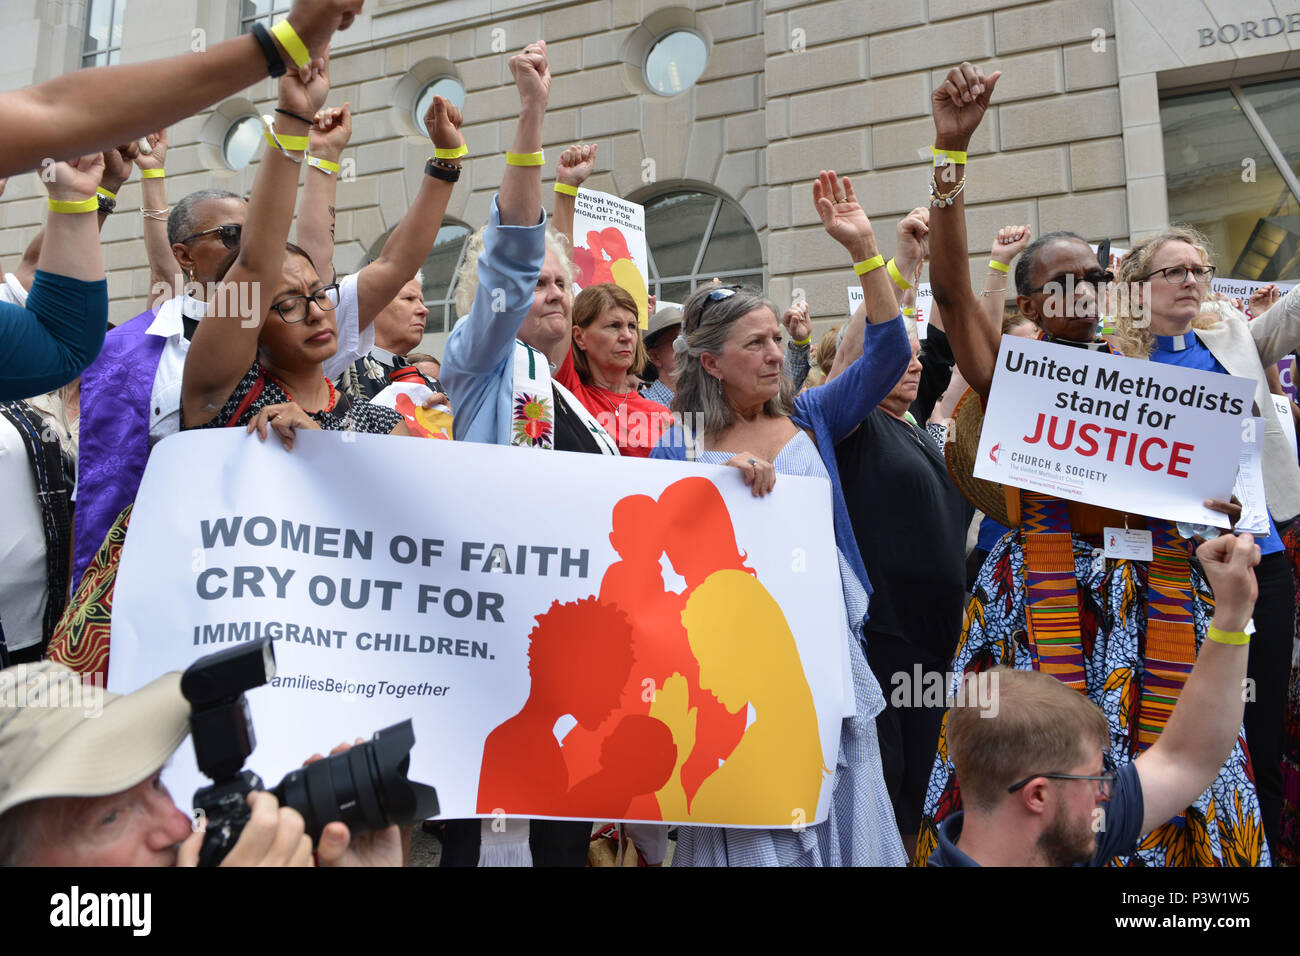 Washington, DC, USA. 19th June, 2018. Women leaders from multiple faith traditions protest outside the Washington, DC, headquarters of U.S. Customs and Border Protection. The women were critical of the Trump administration policy of separating children from their immigrant parents at the U.S. border, a policy that has sparked an outcry from across the religious spectrum. Credit: Jay Mallin/ZUMA Wire/Alamy Live News Stock Photo